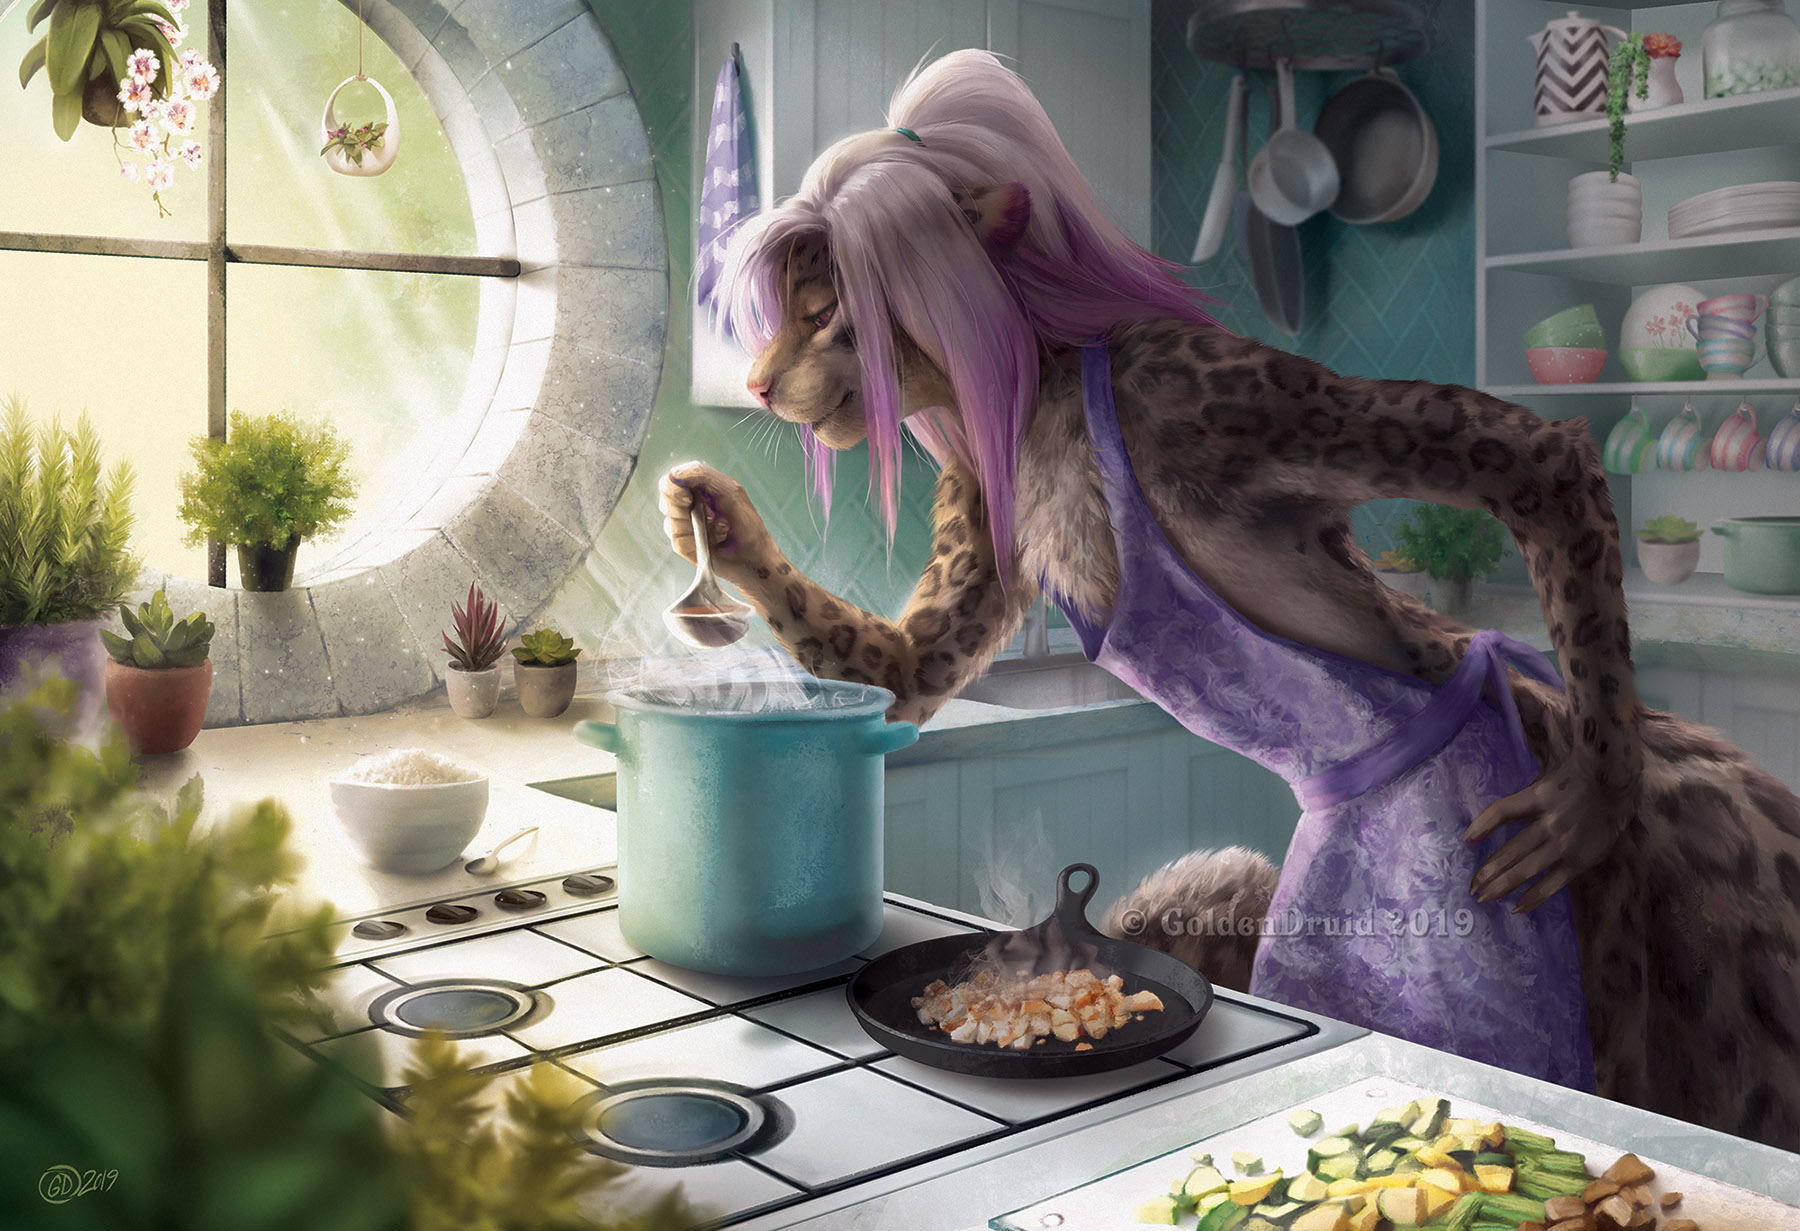 reyathae cooking afternoon meal by goldendruid